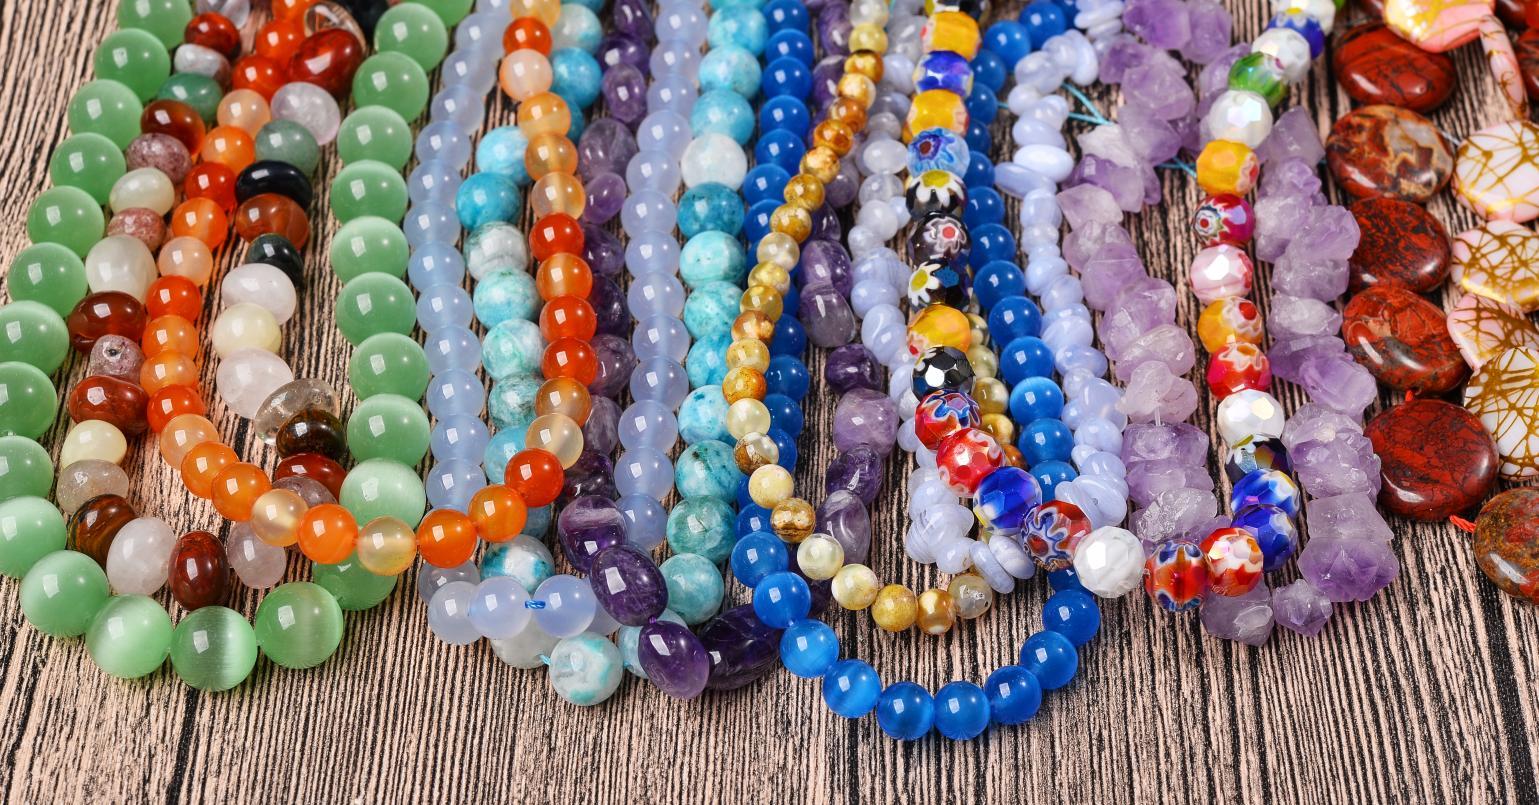 PandaHall Presents Several Beads & Jewelry Findings Designed in a Wide Range of Styles, Colors, and Shapes At a Reasonable Price